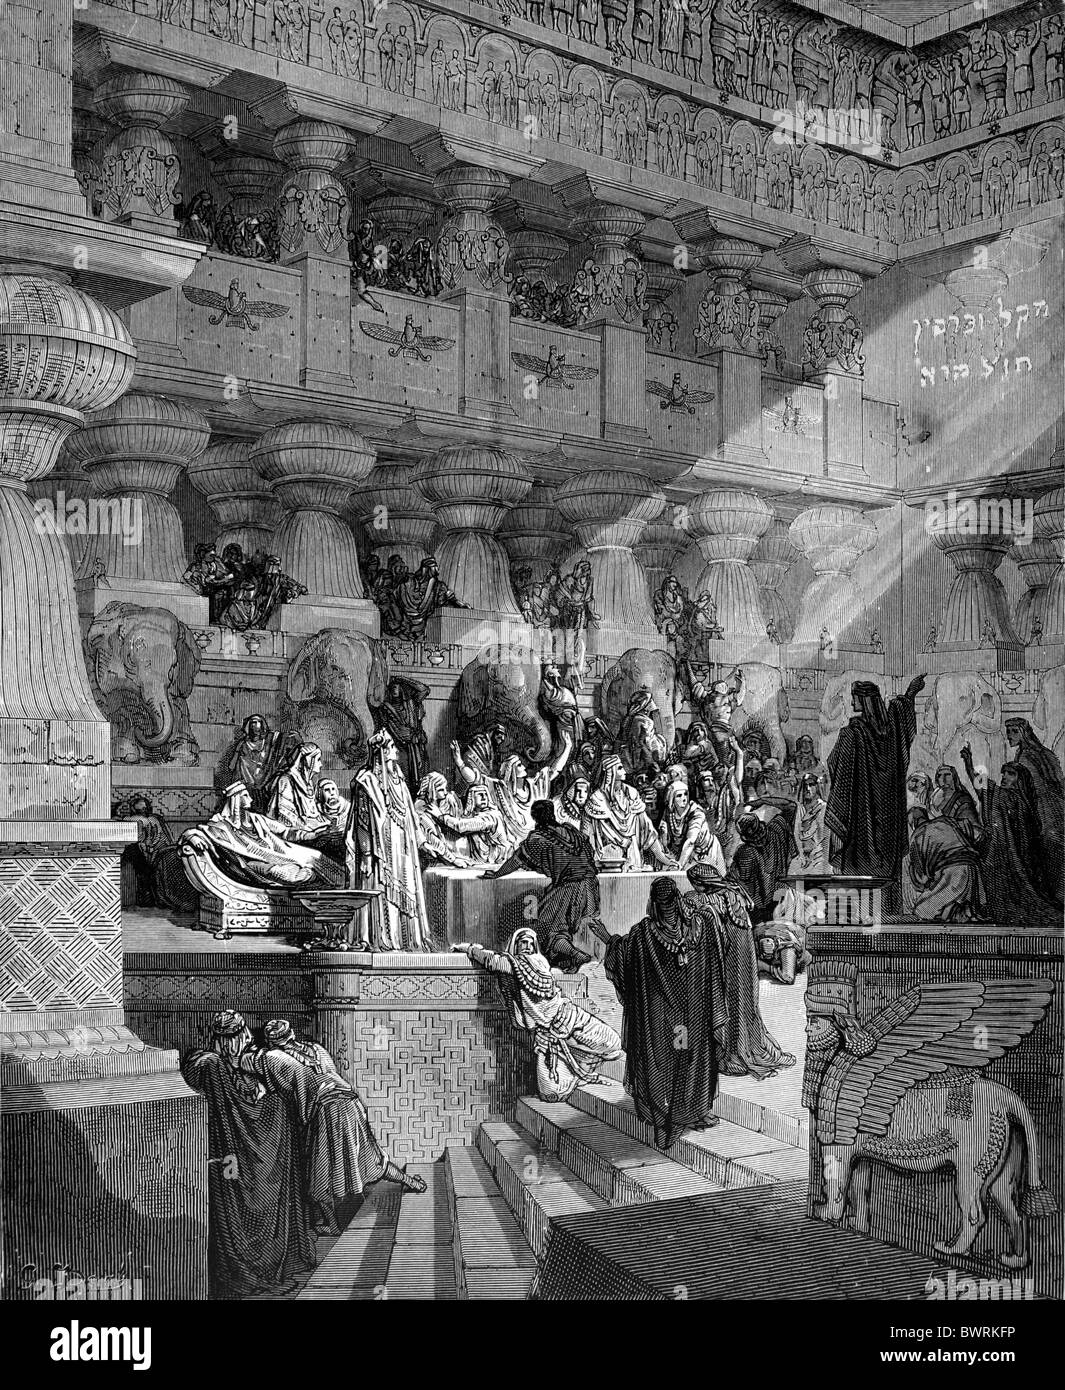 Gustave Doré; Daniel Interpreting the Writing on the Wall; Black and White Engraving Stock Photo